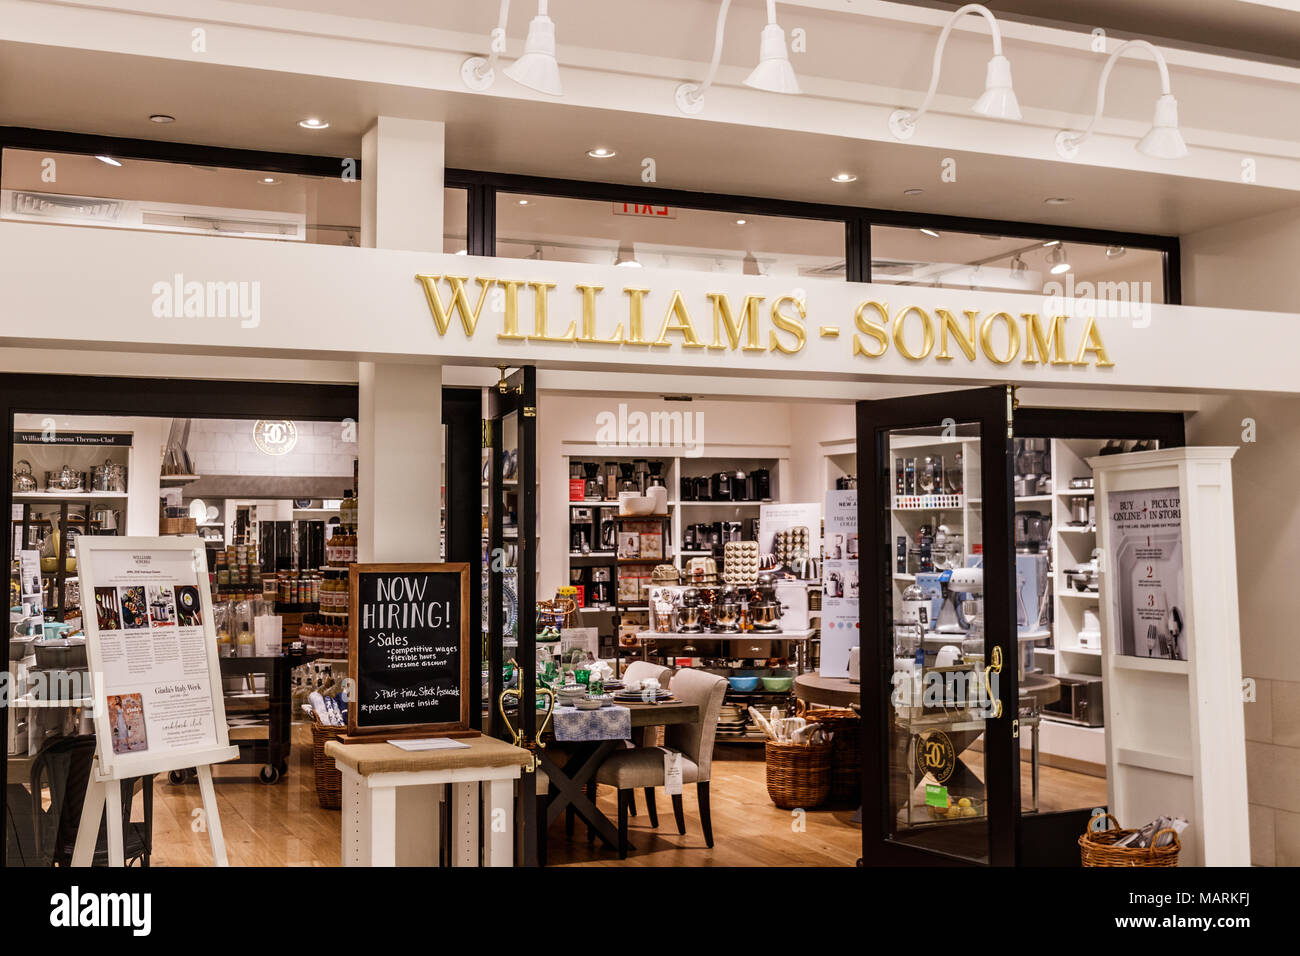 Holiday shopping 2021: Williams-Sonoma to ride holiday